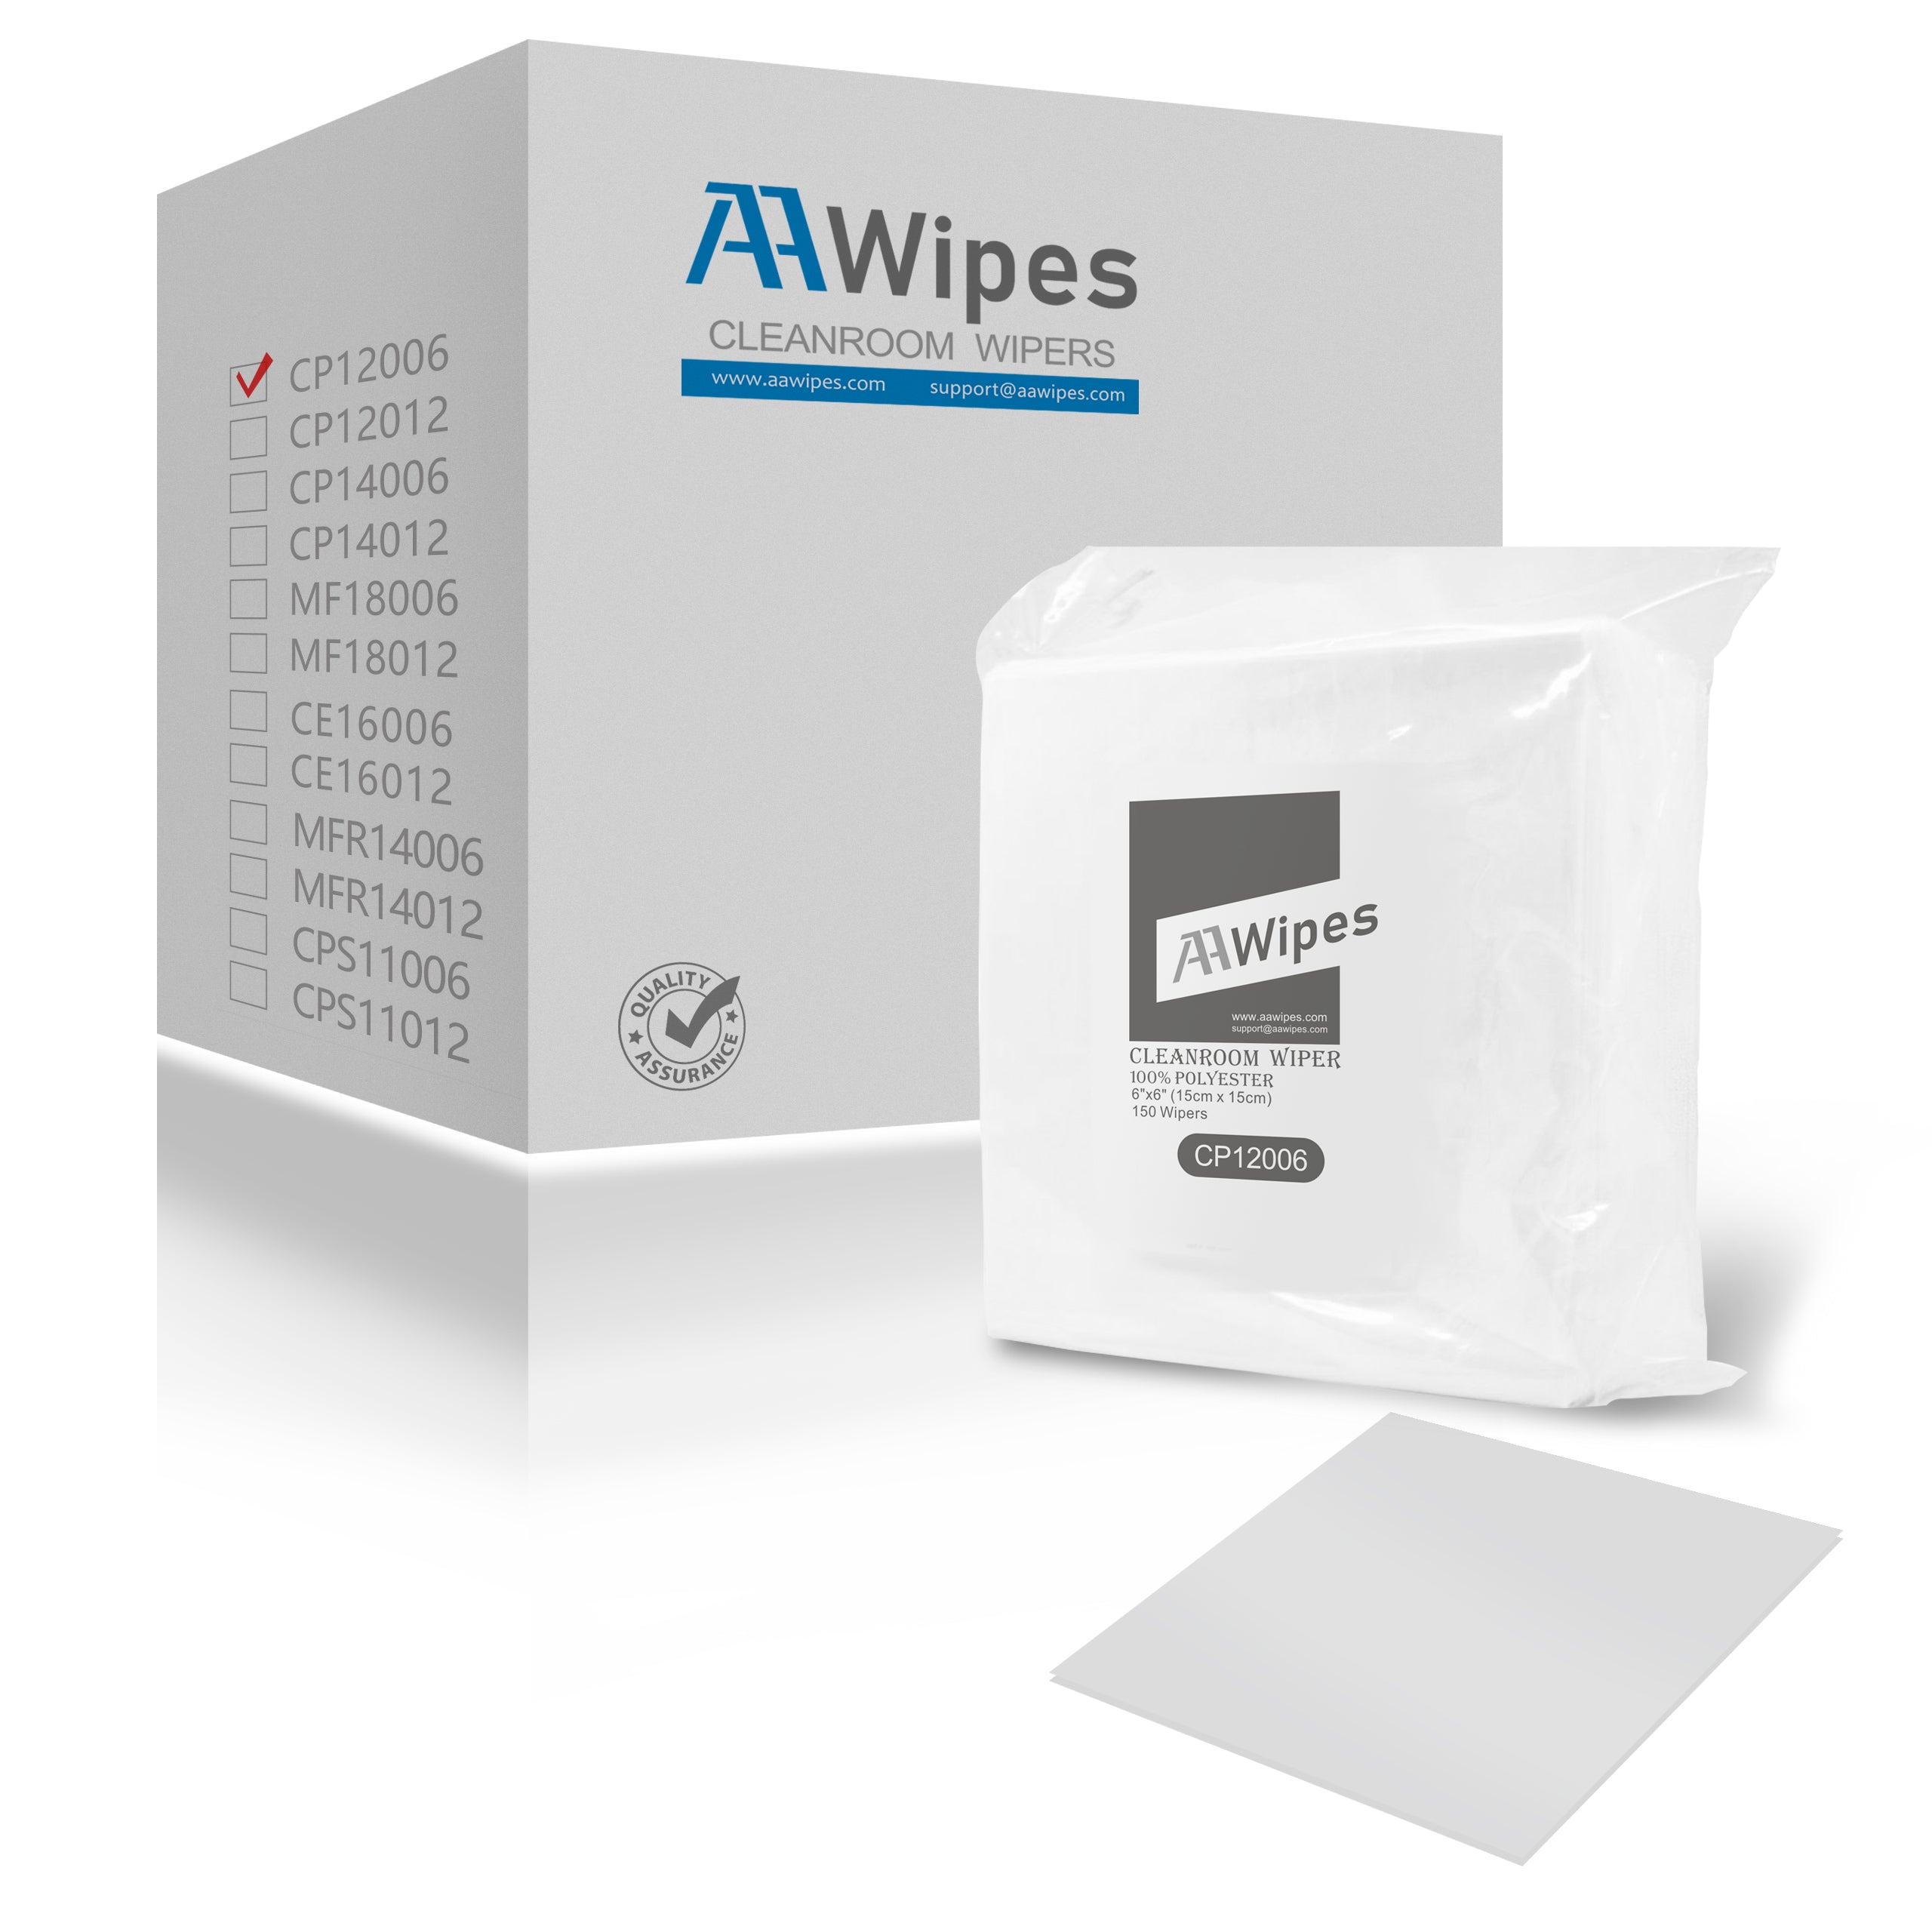 AAwipes Critical Environment Wipes: 6"x6" Double Knit, 100% Polyester. Pharmaceutical-grade, delicate task wipes. 6,000 wipes/box, 40 bags (No. CP12006).